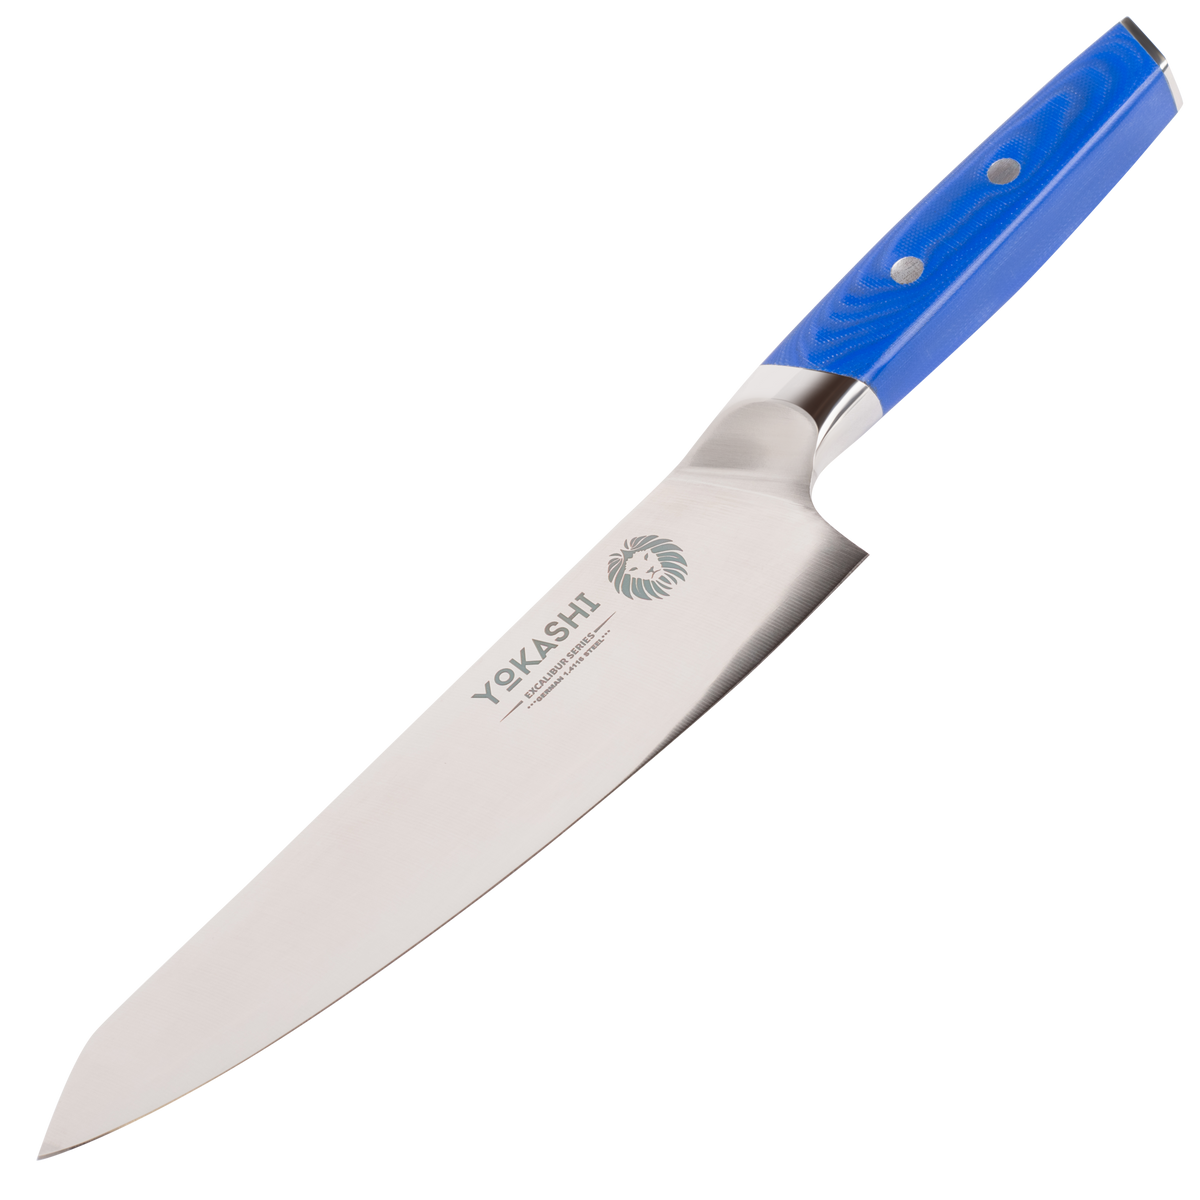 Excalibur chef knife 8 inch